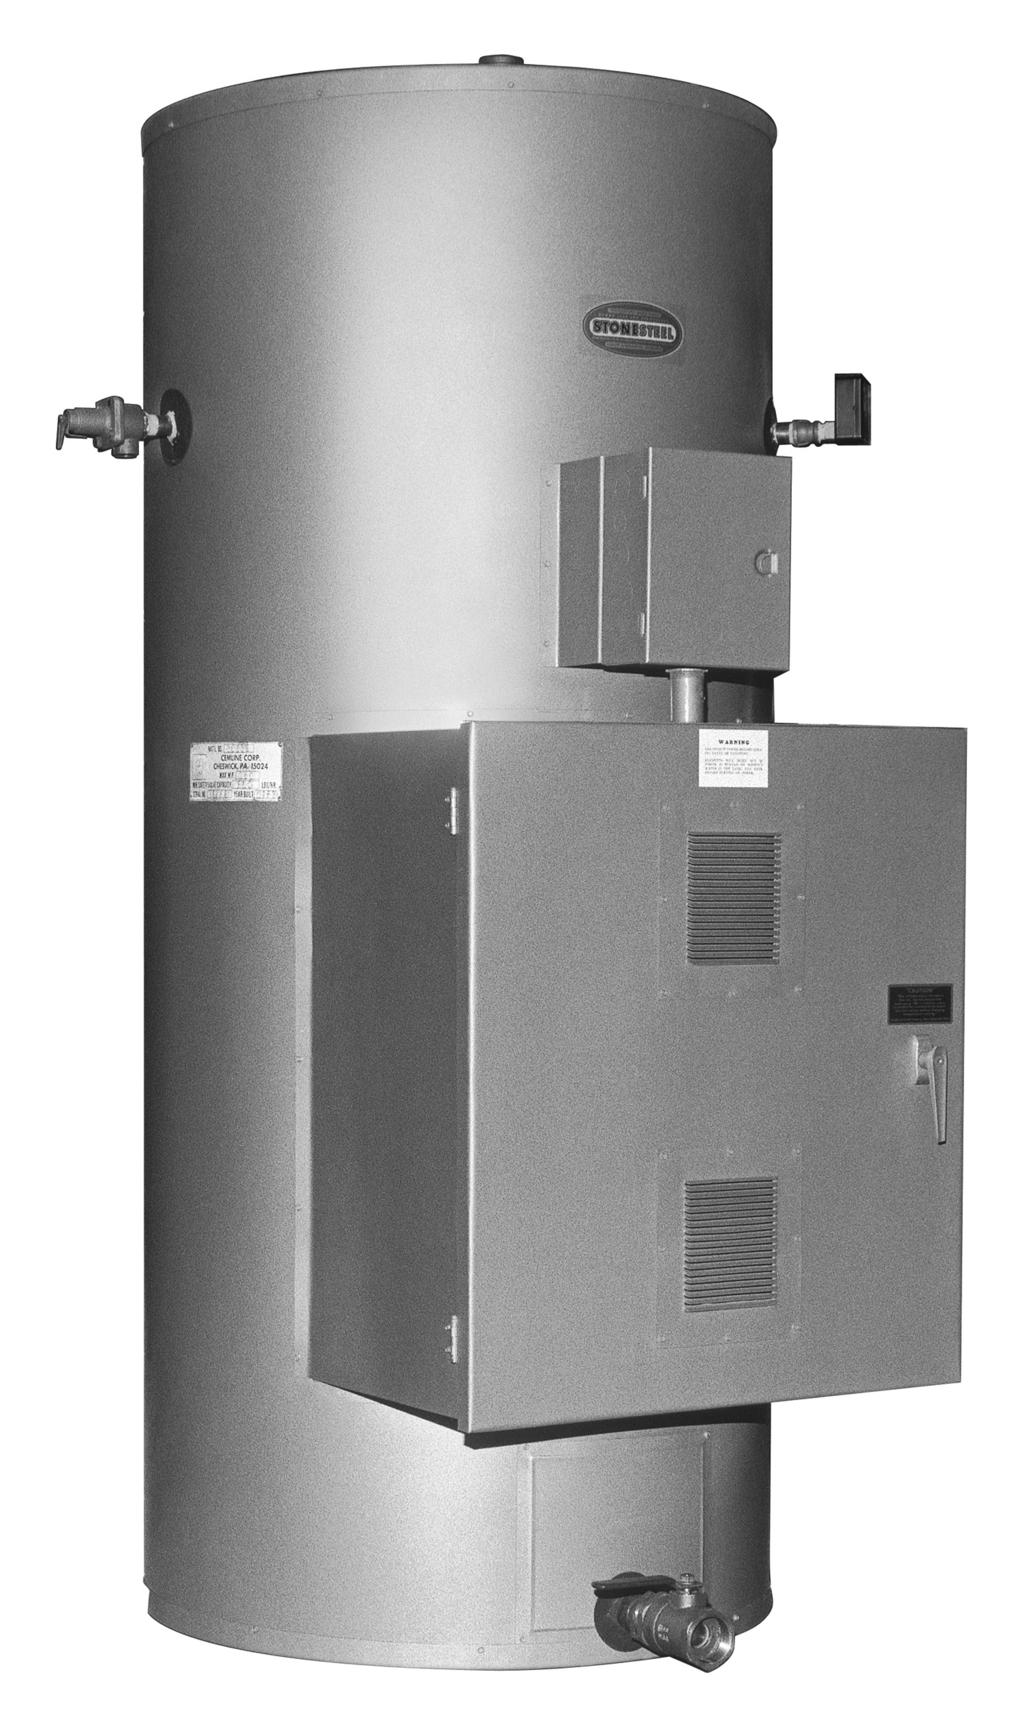 EHB Series STONESTEEL Commercial Electric Water Heaters Individually Mounted Elements Vertical or Horizontal STONESTEEL is a registered